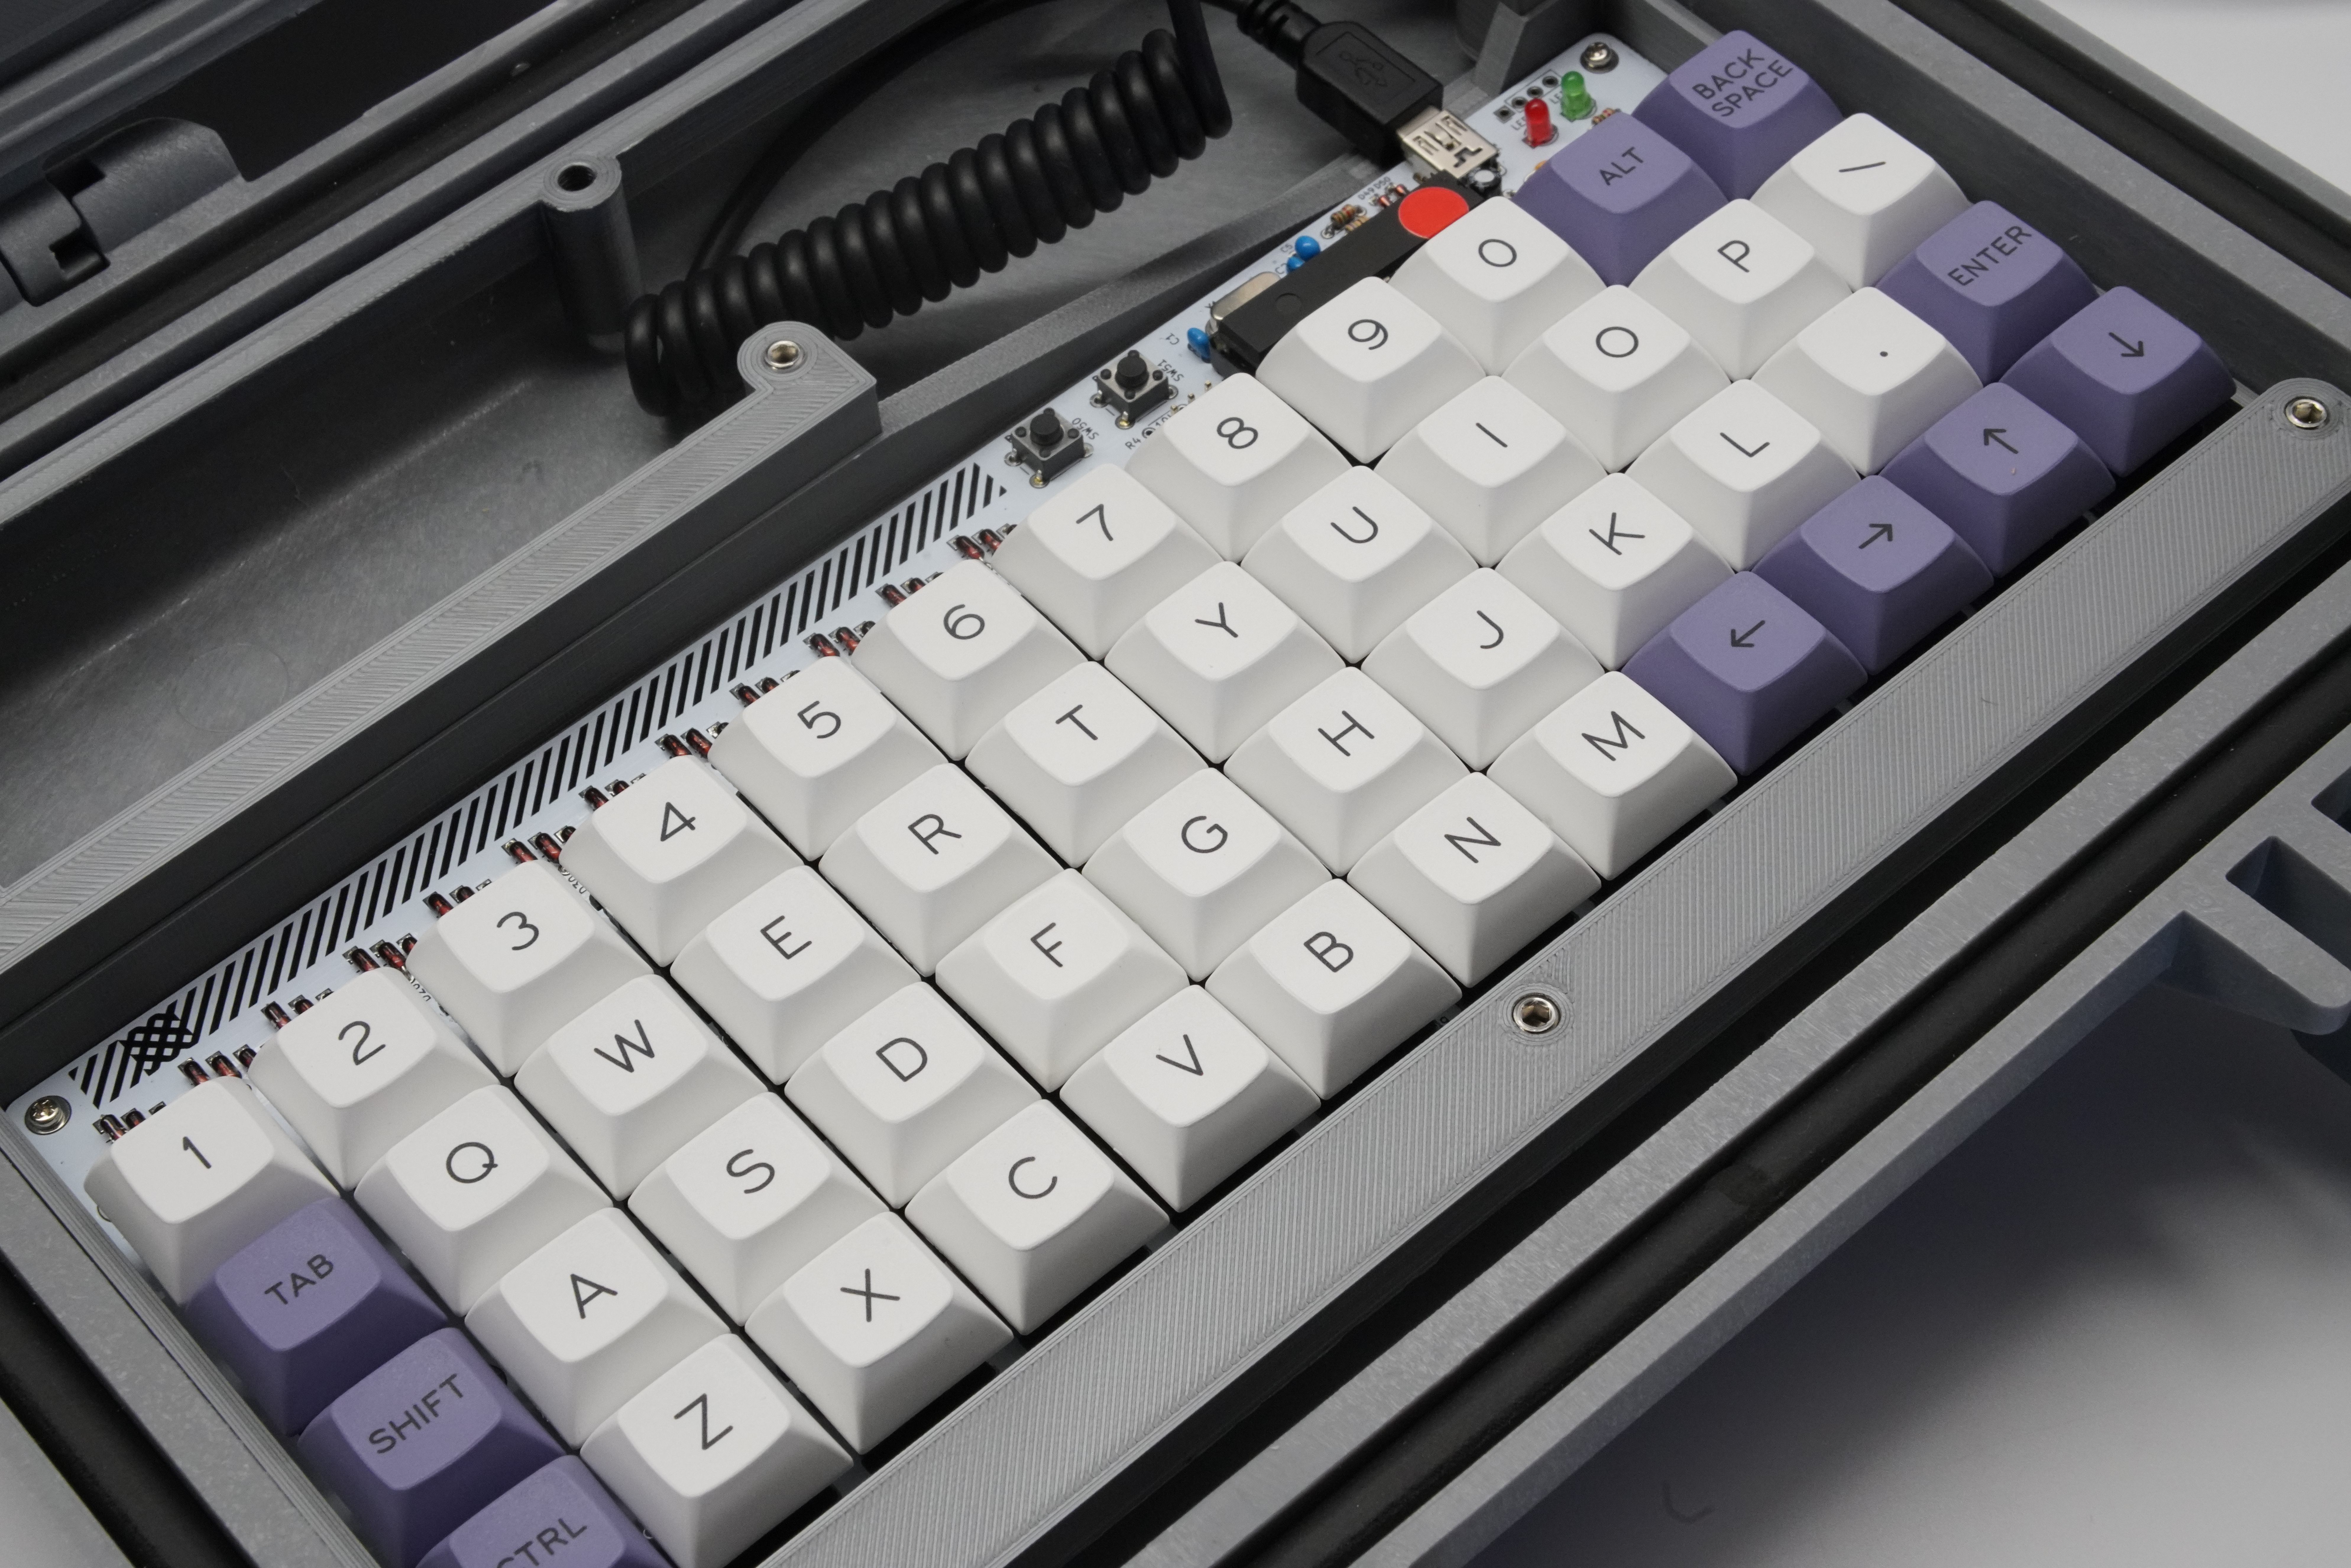 The Plaid ortholinear (grid layout) keyboard was a perfect fit for the Pelican 1300 ruggedised case